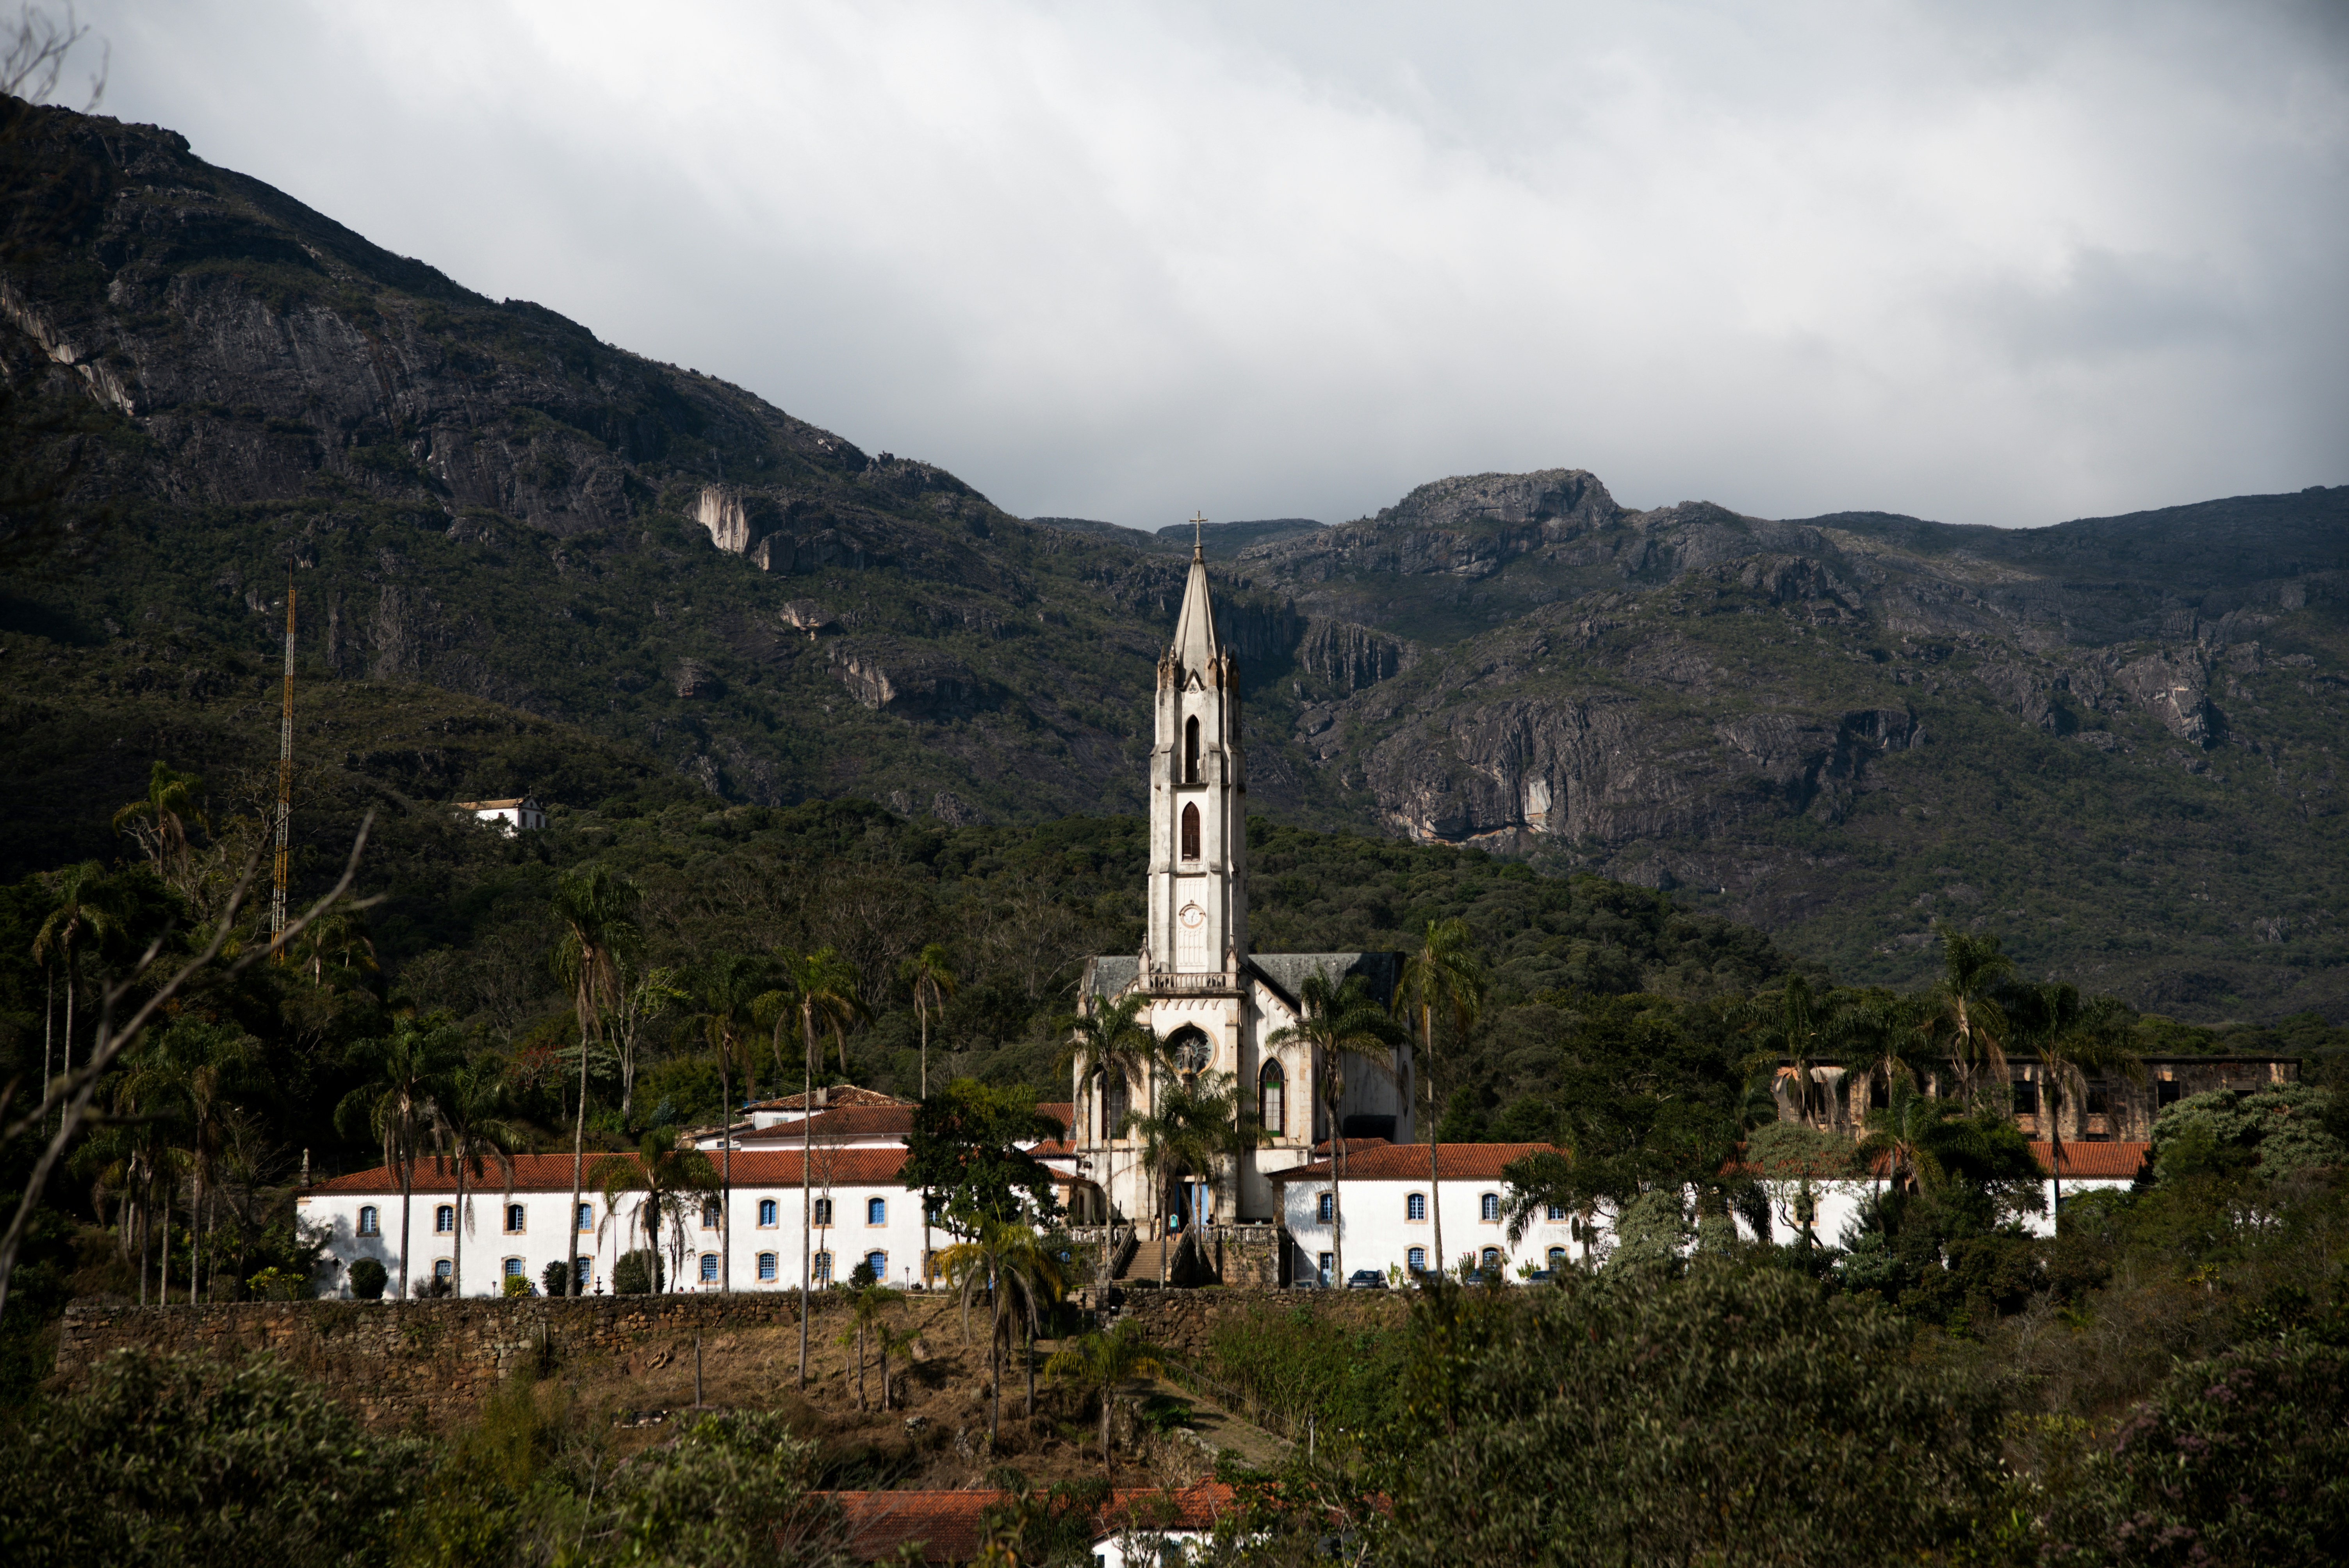 Santuario do Caraça in Portuguese, is an unusual destination. It is as much a place of spiritual pilgrimage as it is a nature sanctuary. Established in 1774 by a Portuguese monk Brother Lourenço, Caraça has been later converted into a seminary that served as an important Catholic educational institution for 148 years. The architectural complex at Caraca consists of a neo-Gothic church bookended by the side wings of a two-story Baroque-style building that houses the living quarters, the two dining halls and various other facilities.